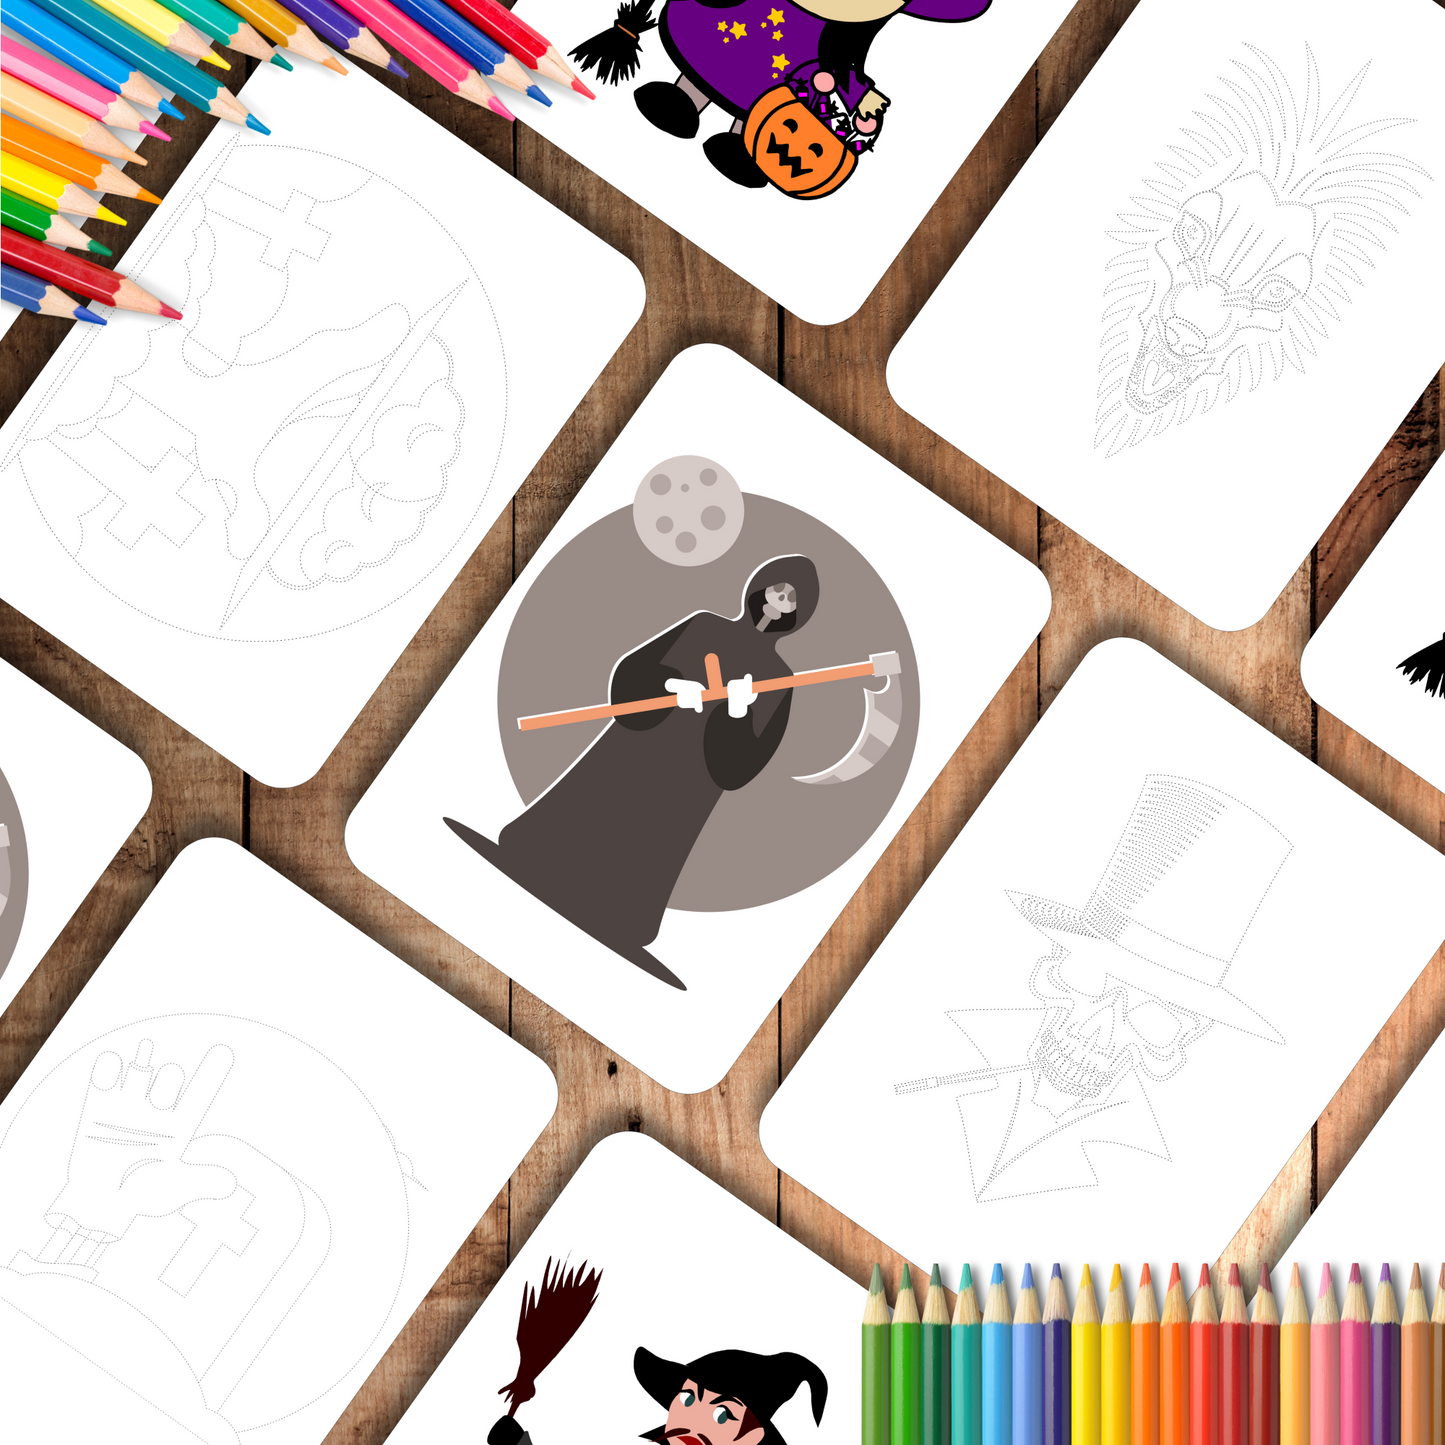 42 Remarkable 2 Halloween Tracing Pages